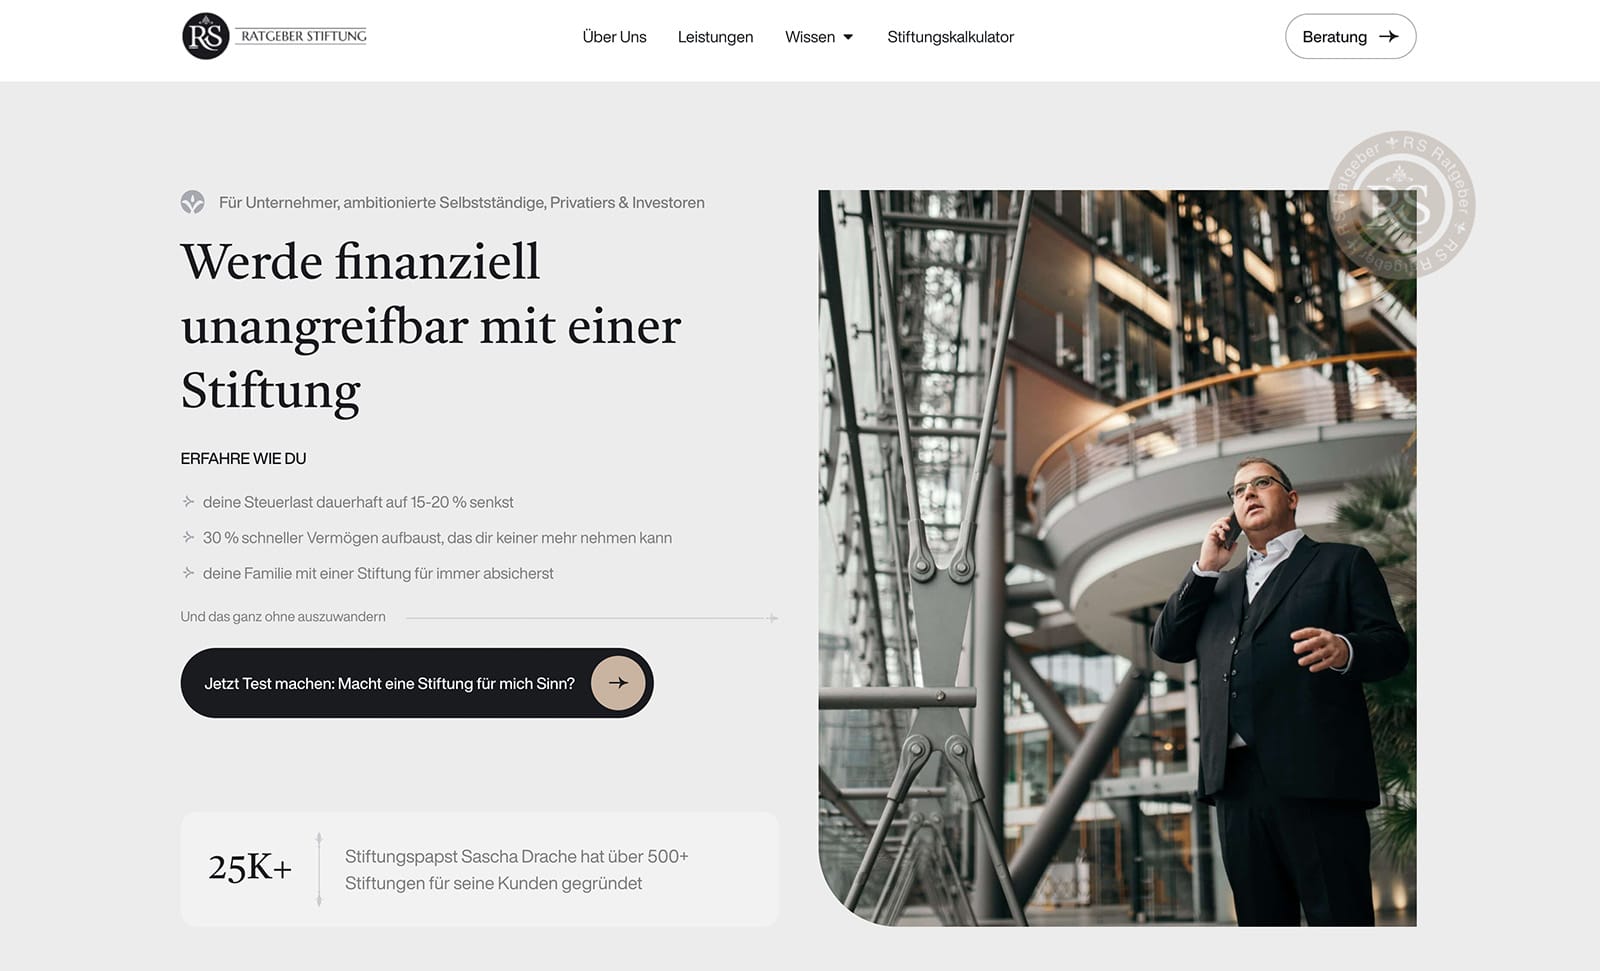 rs ratgeber stiftung homepage